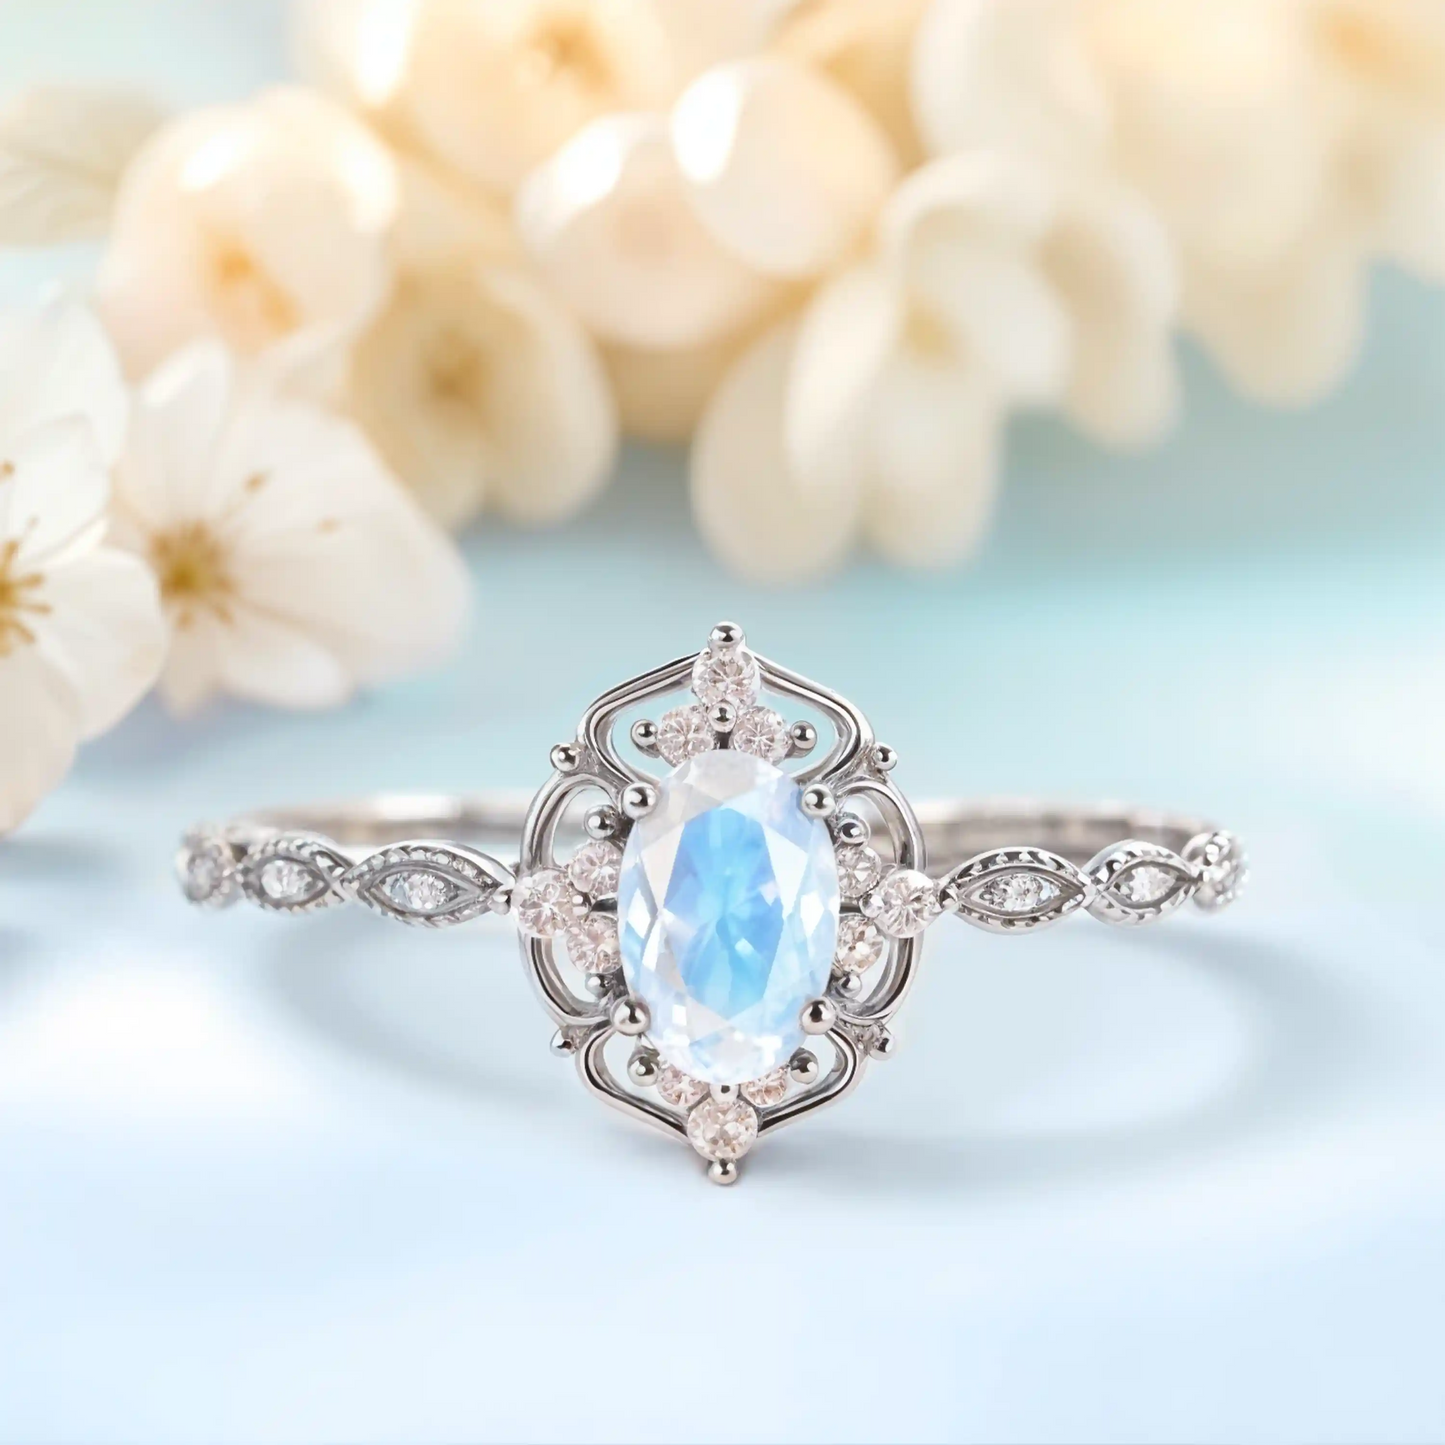 Moonstone & White Zircon wedding ring plated with white gold